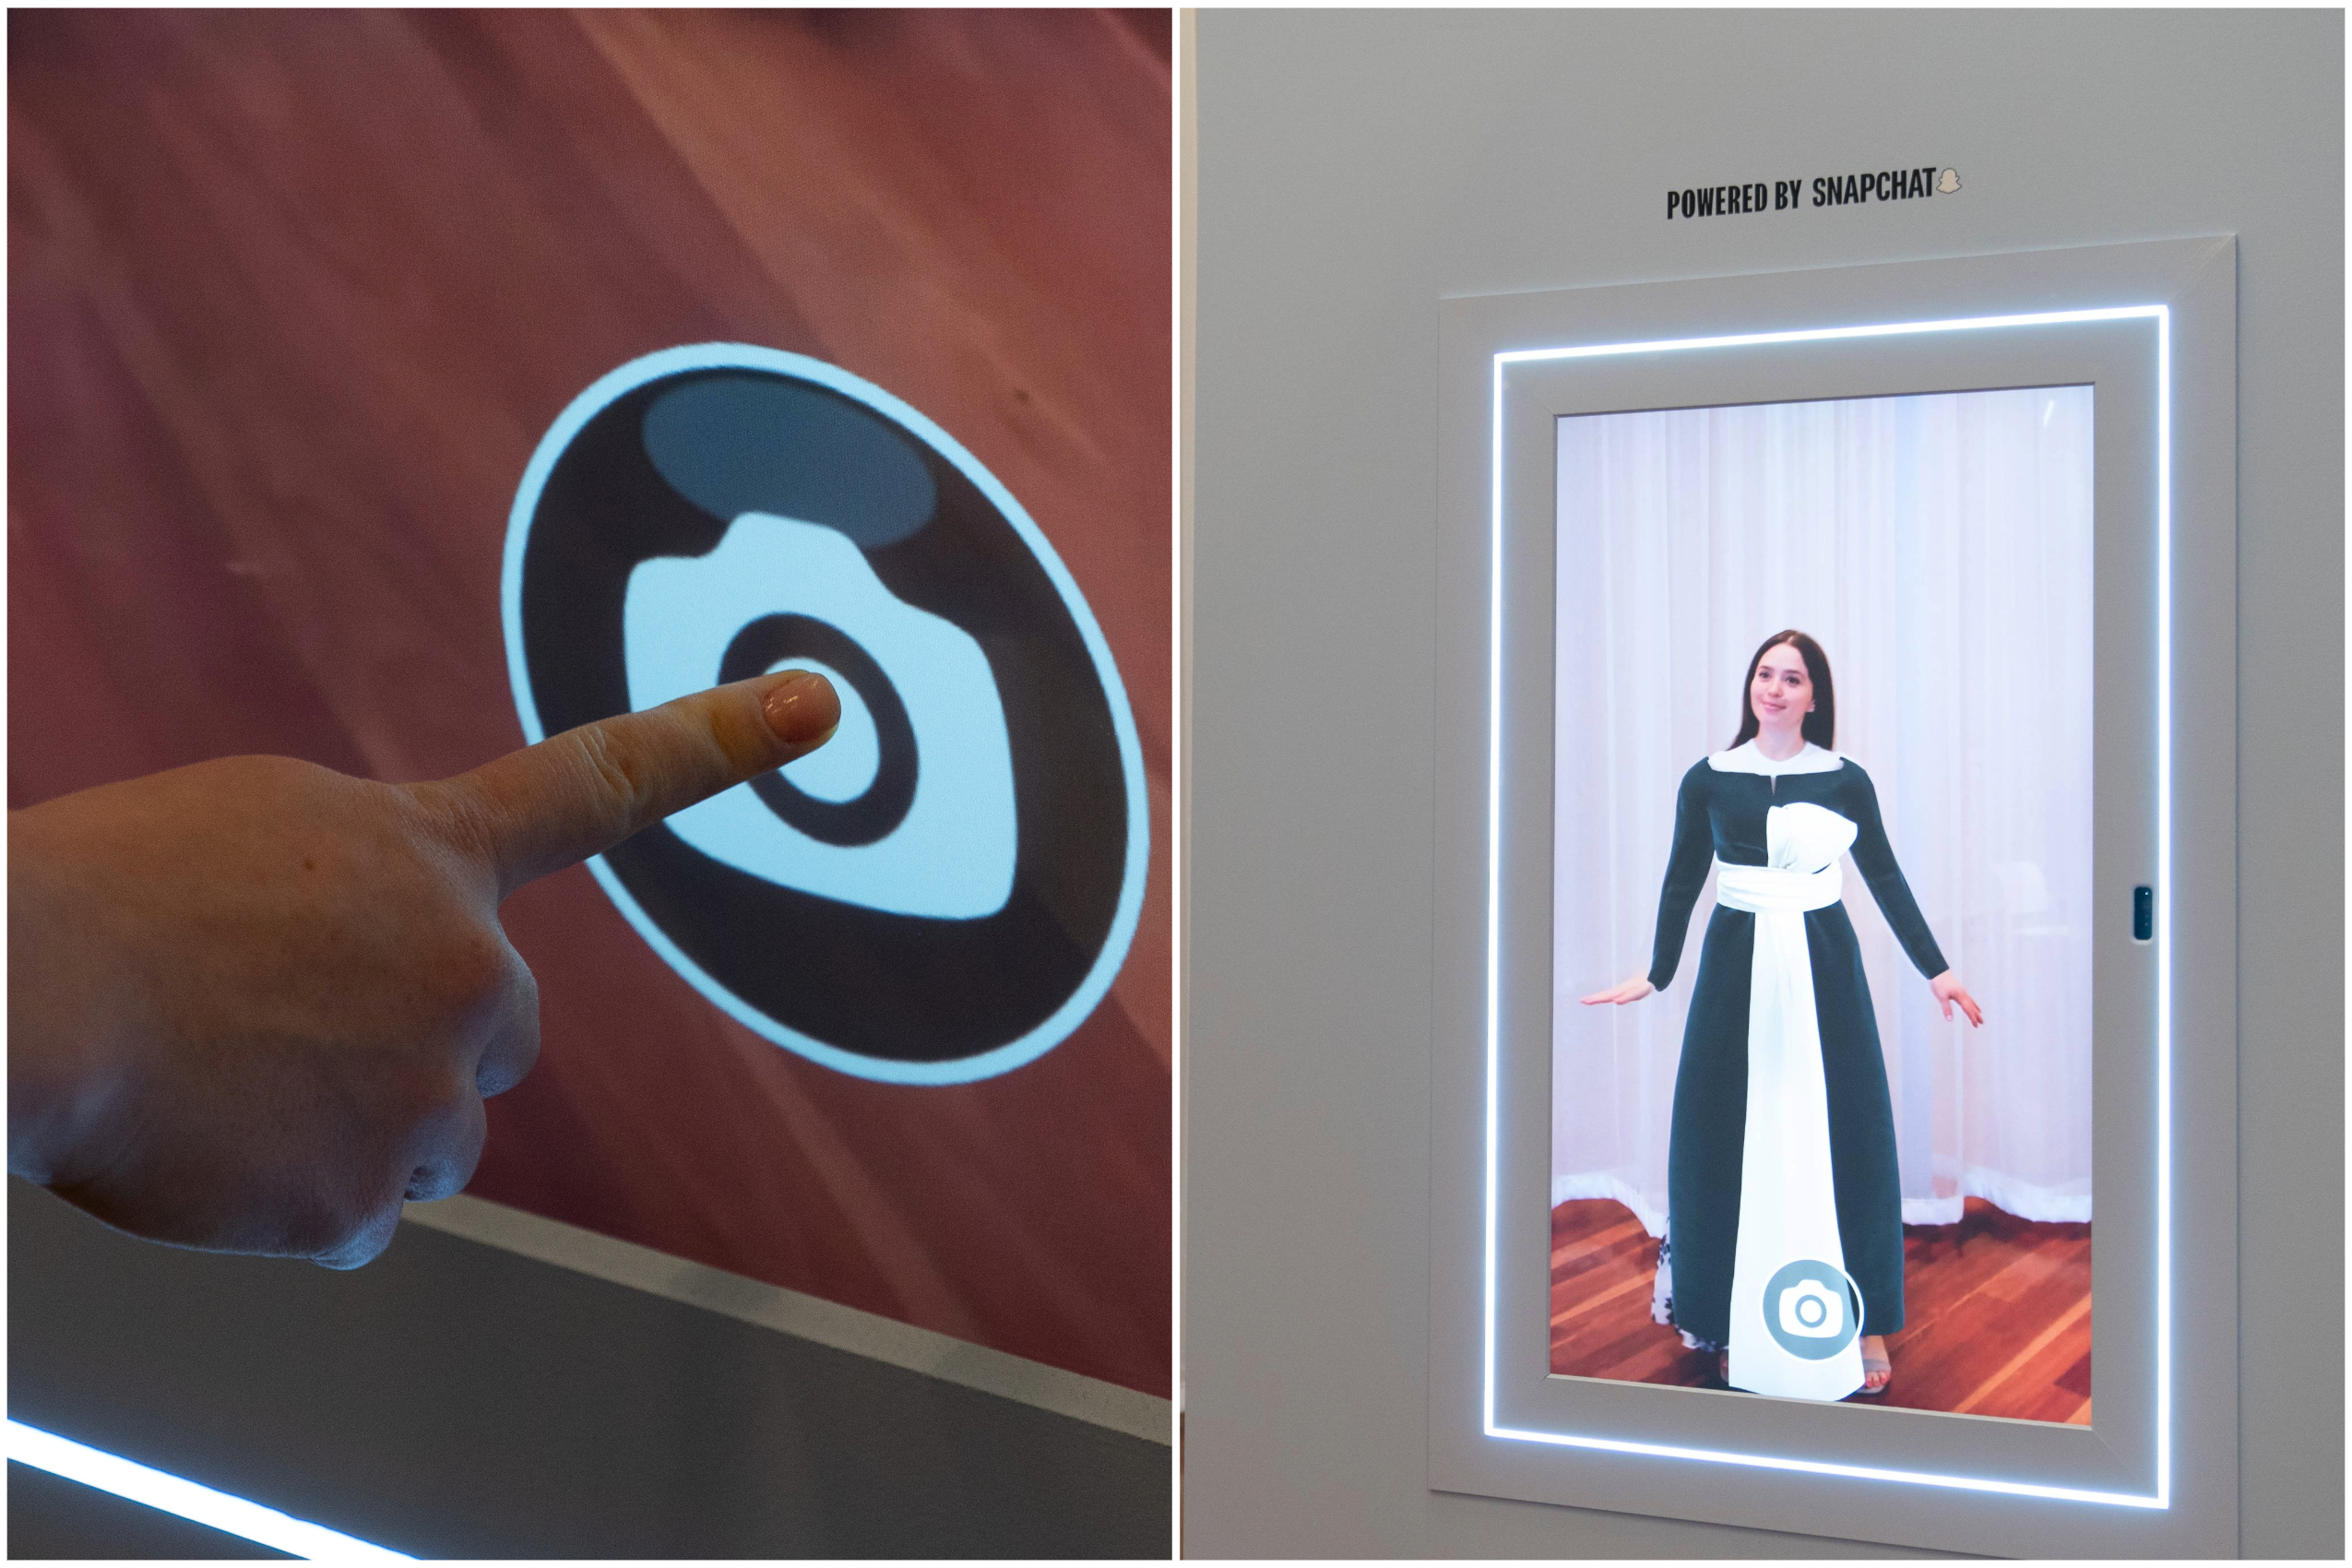 A person presses a button with a camera icon on it next to a screen of a woman dressed in a fancy gown.